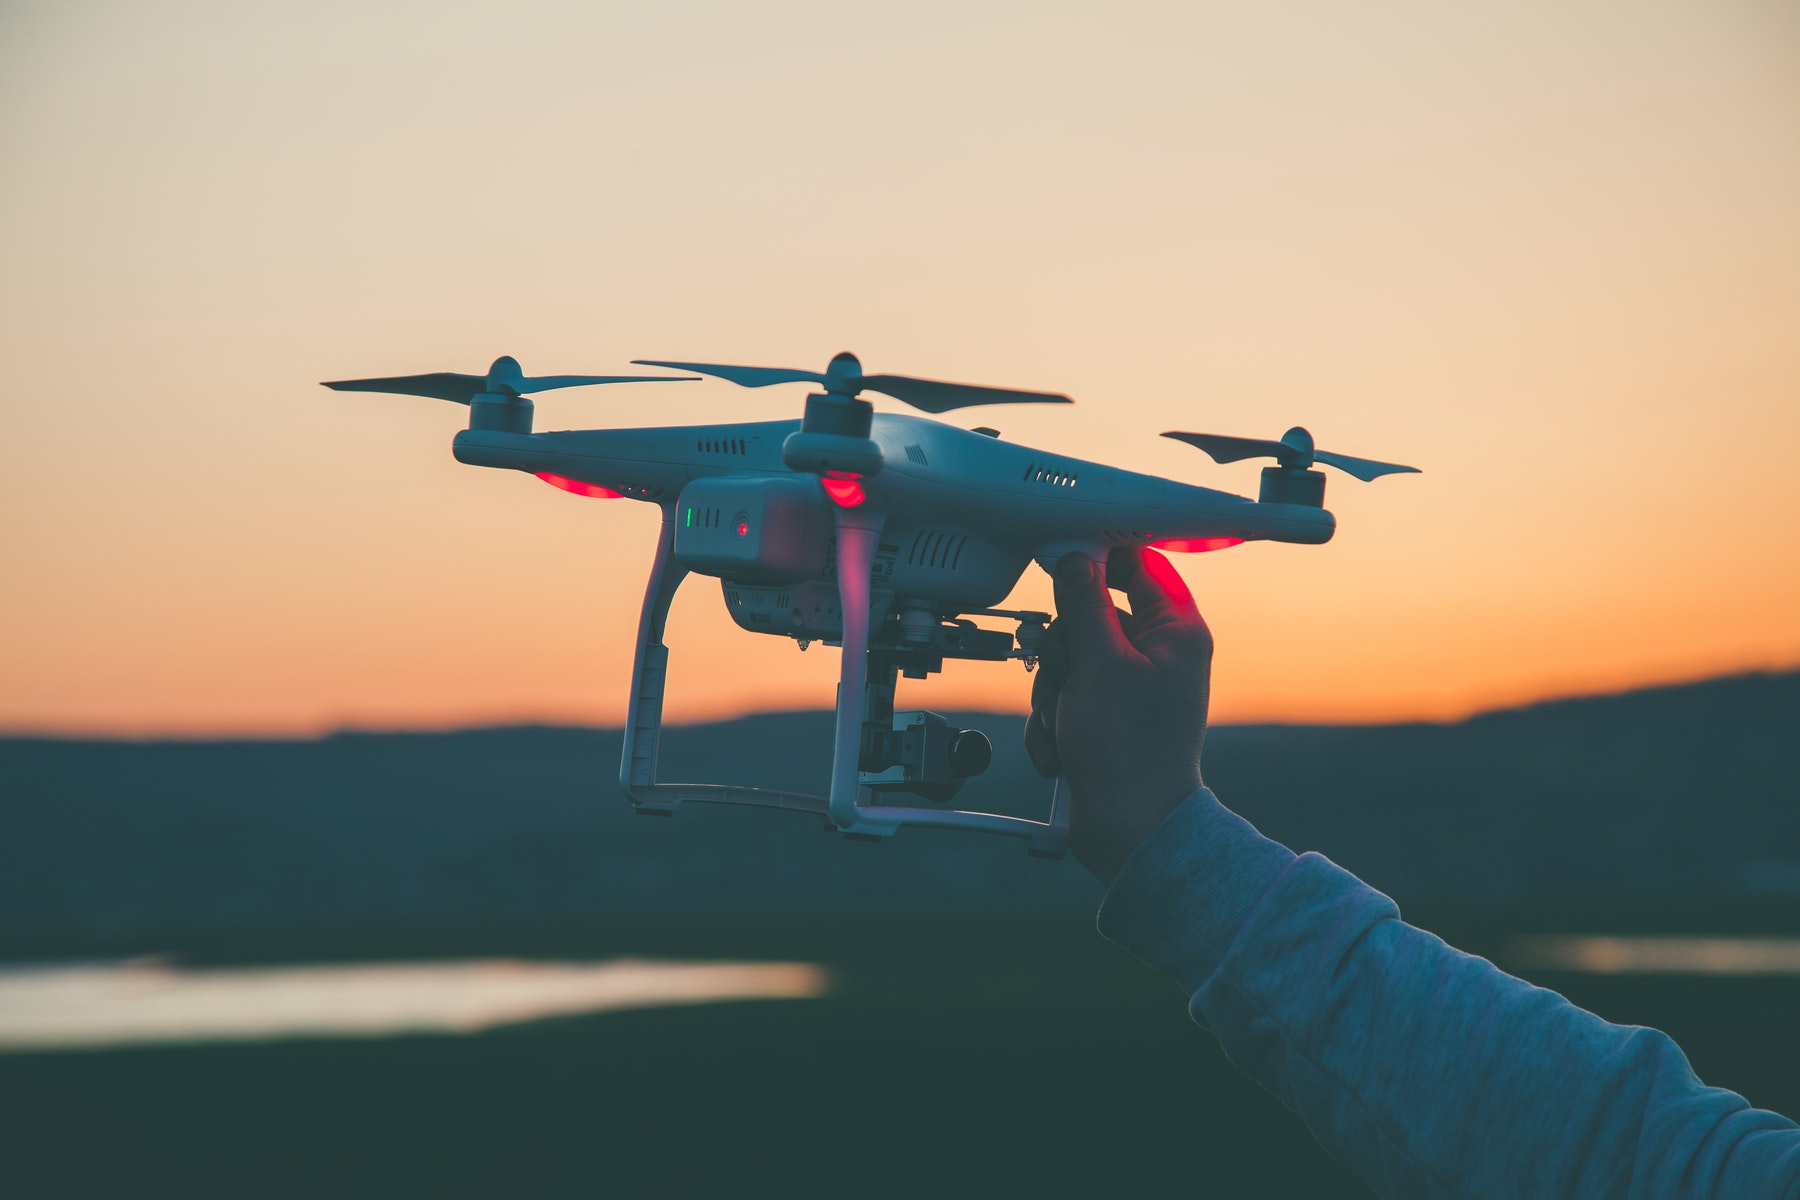 Demand for Drones on the rise, due to COVID-19 Disruption